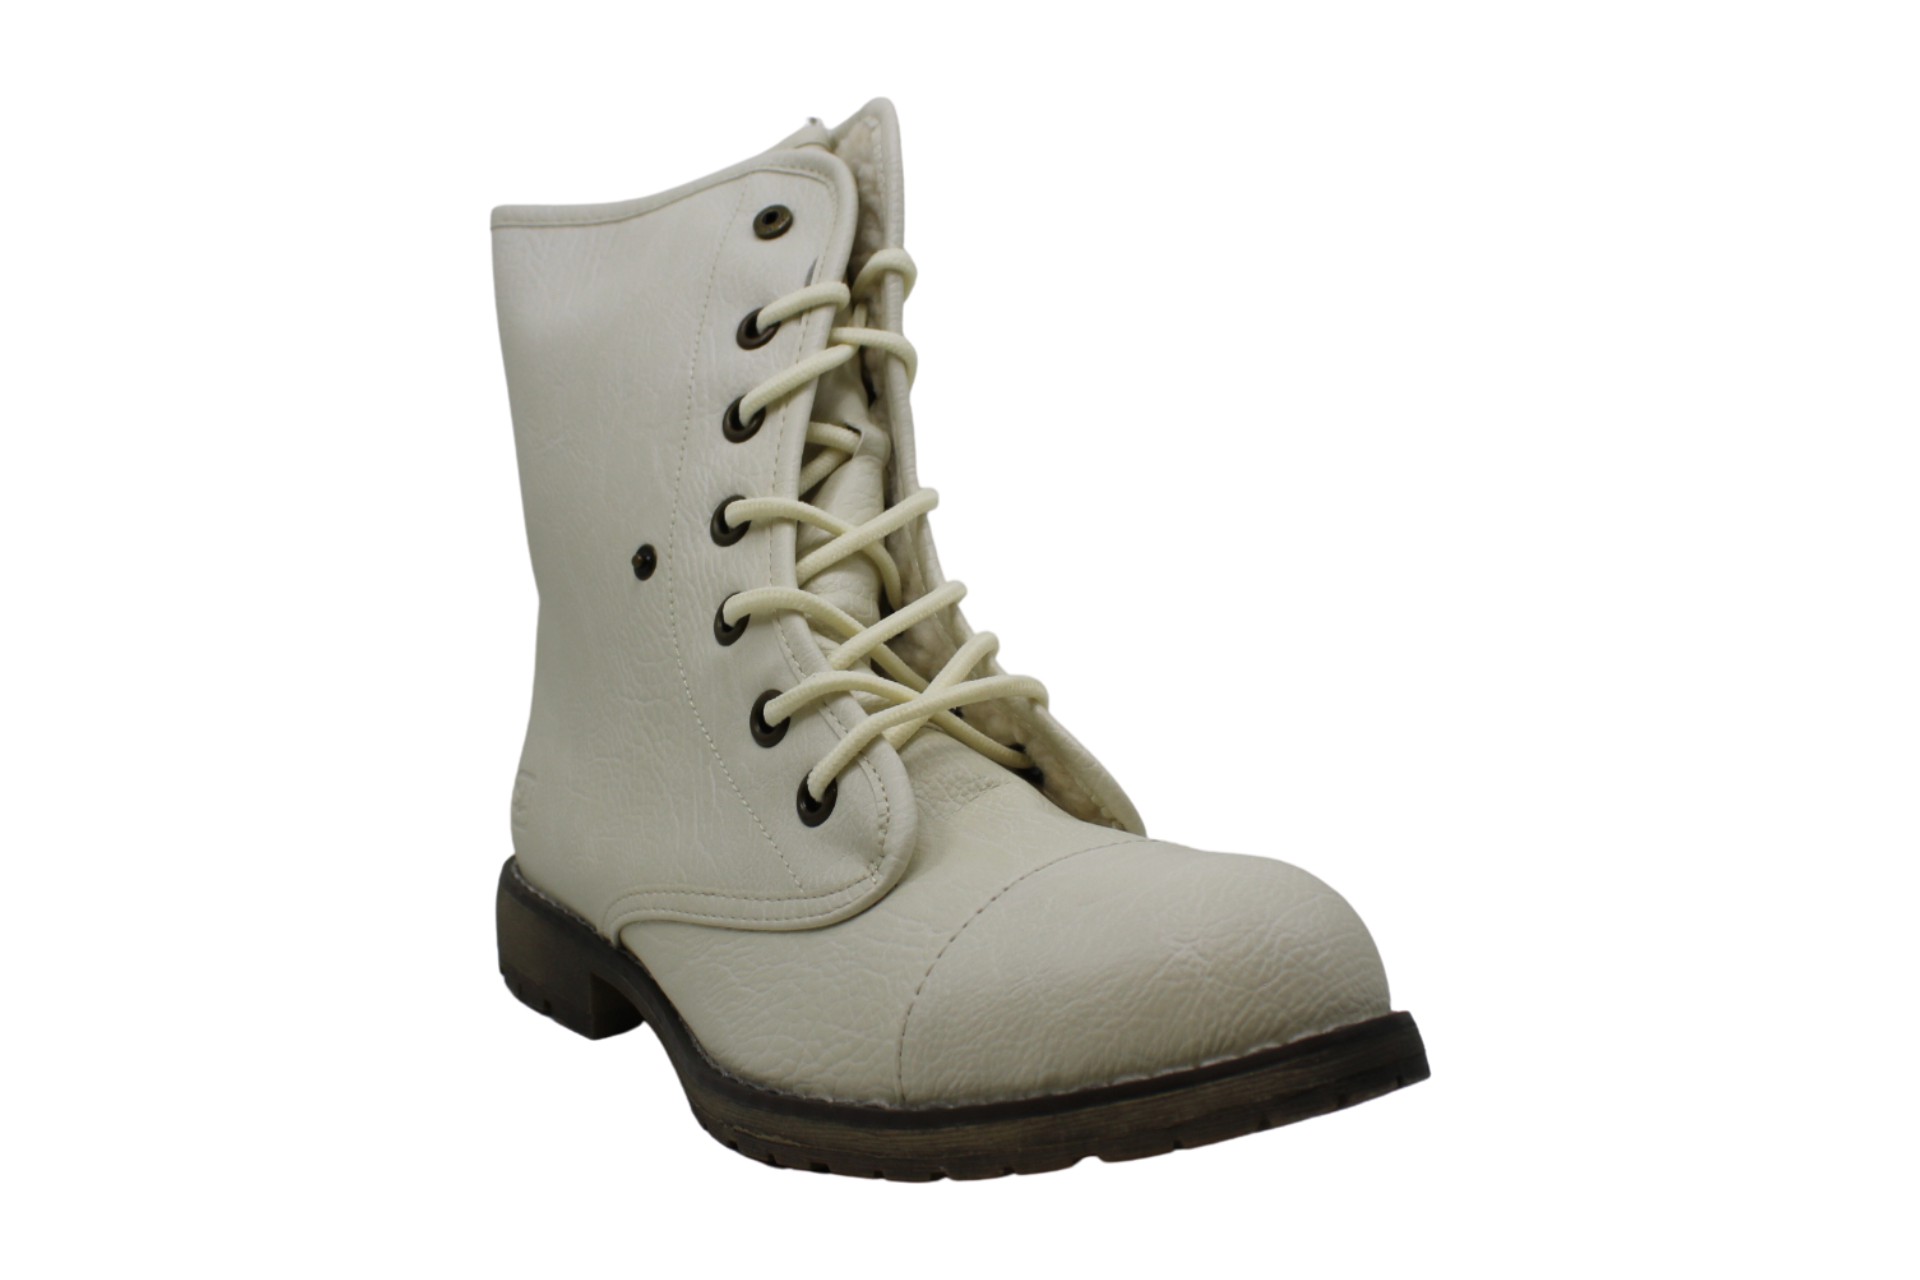 Dirty Laundry Womens Boots in White Color, Size 8 WZL | eBay